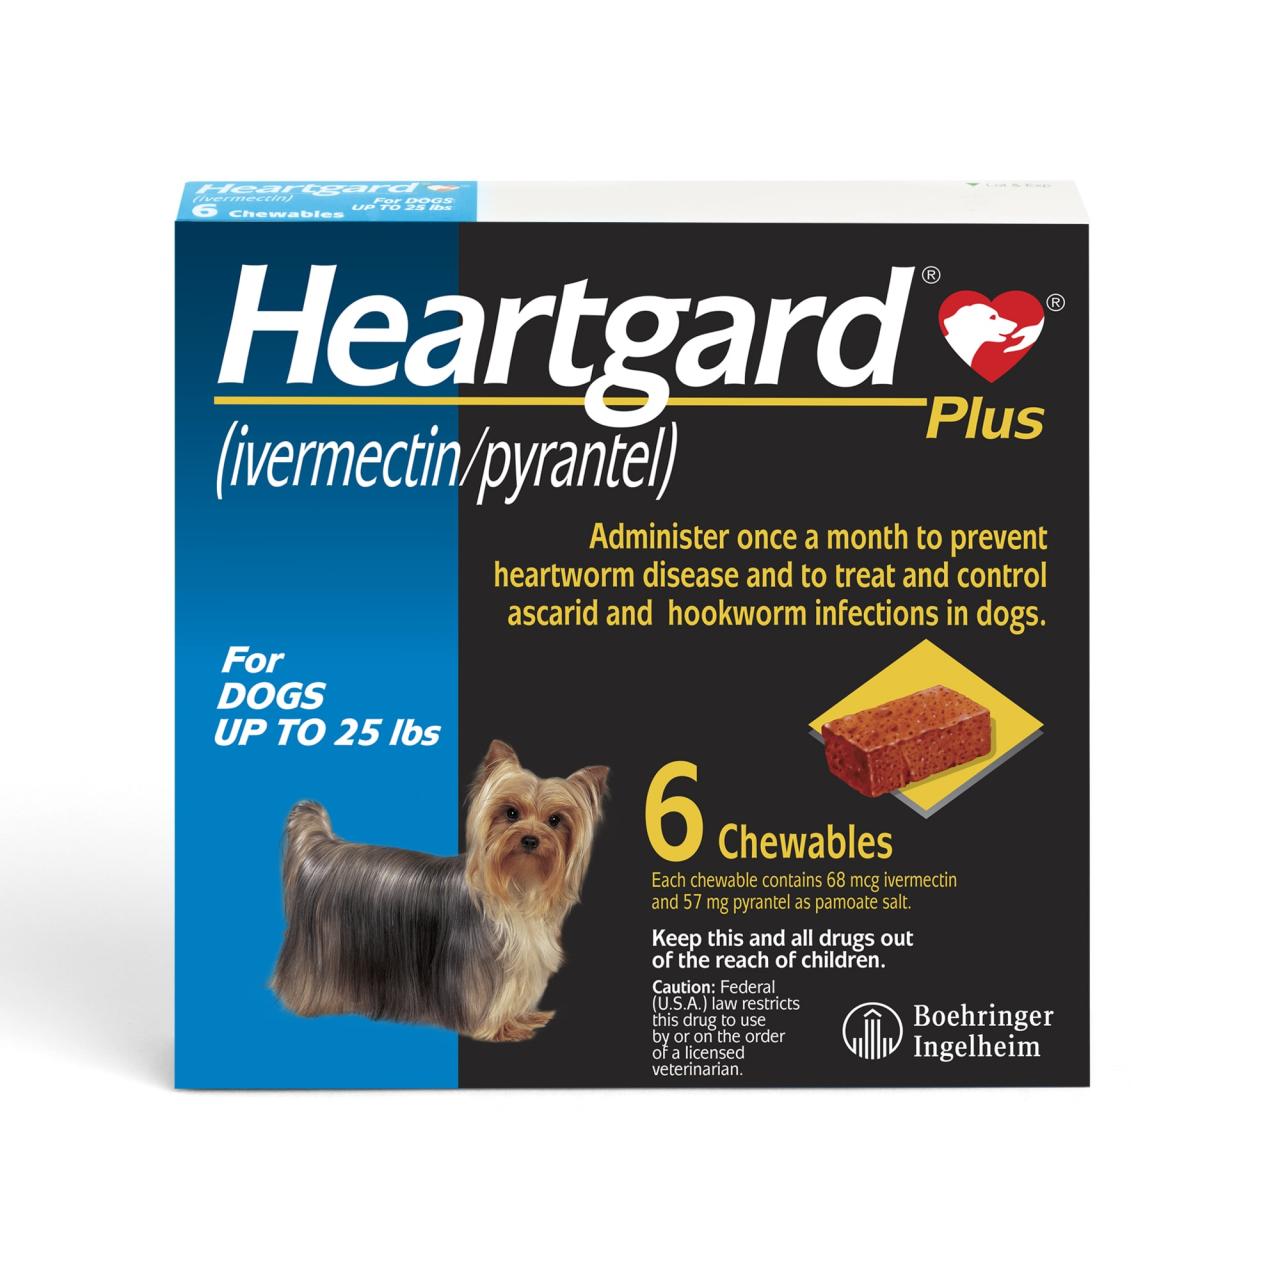 Heartgard Plus Chewables For Dogs Up To 25 Lbs., 6 Month Supply | Petco